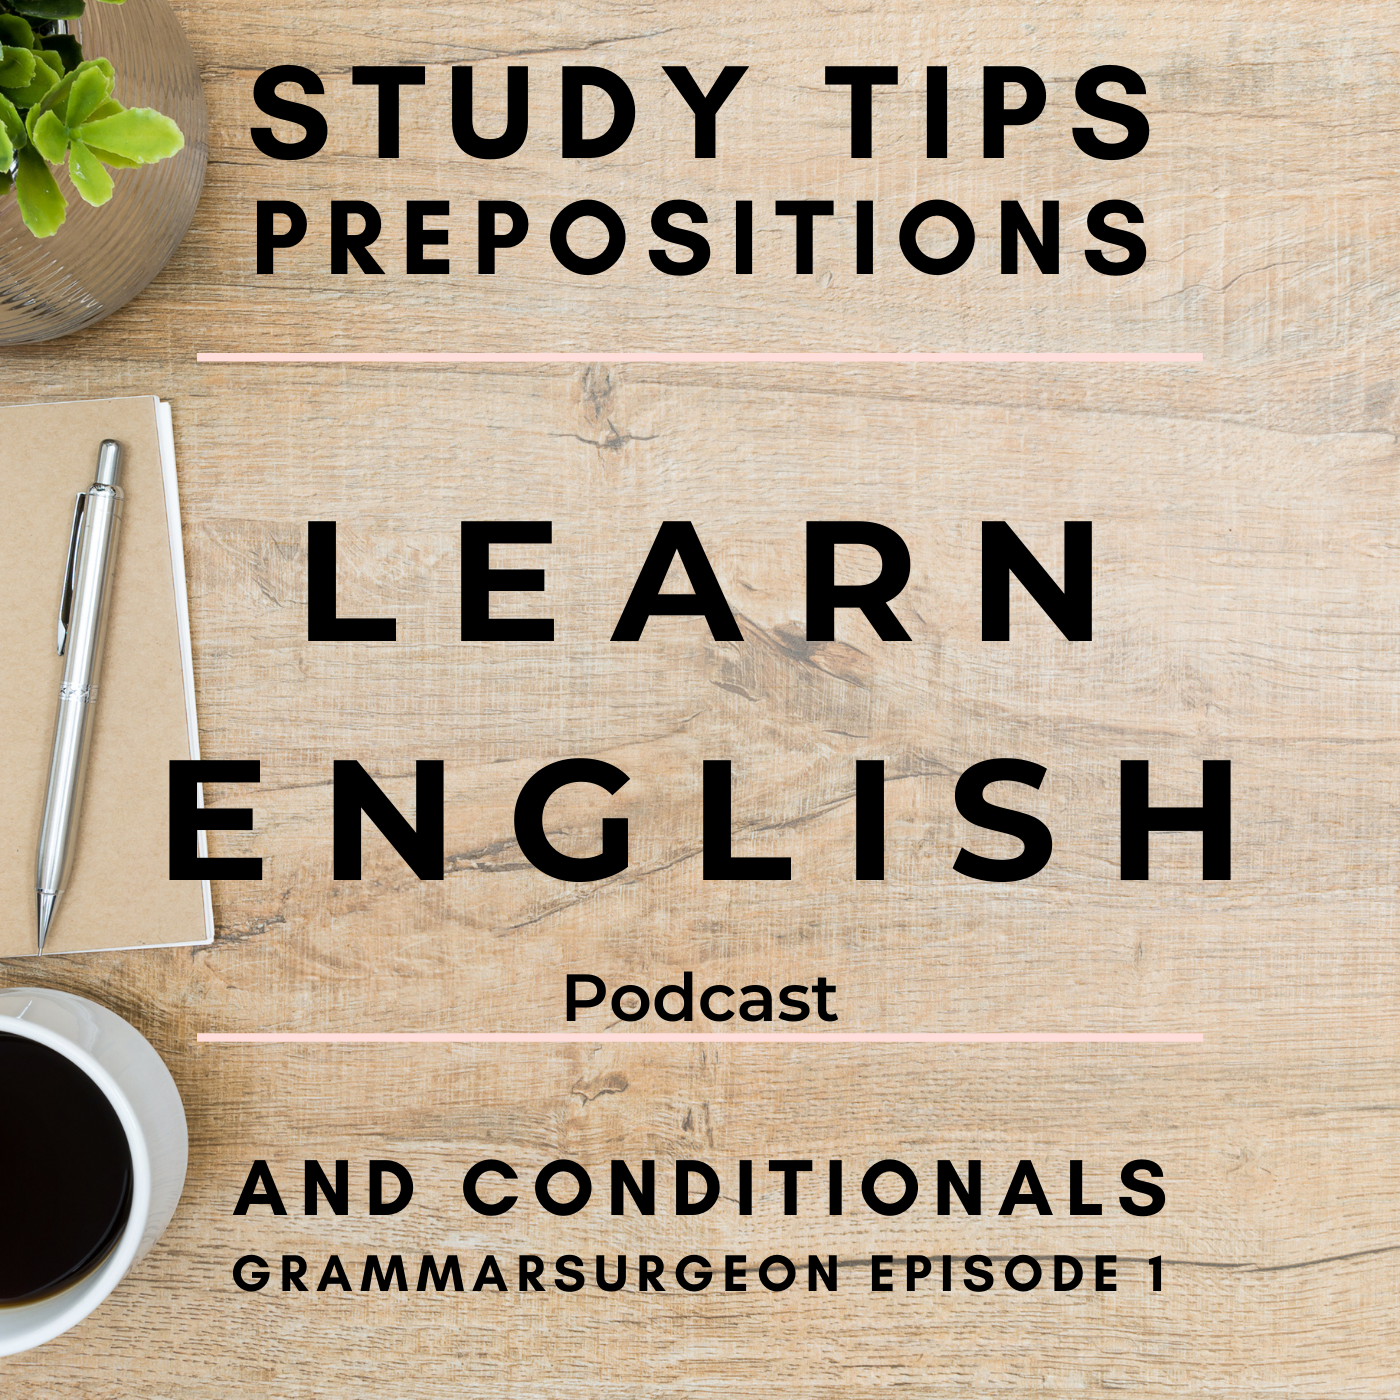 Learn English Podcast: Study Tips, Prepositions and conditionals (Grammarsurgeon Episode 1)